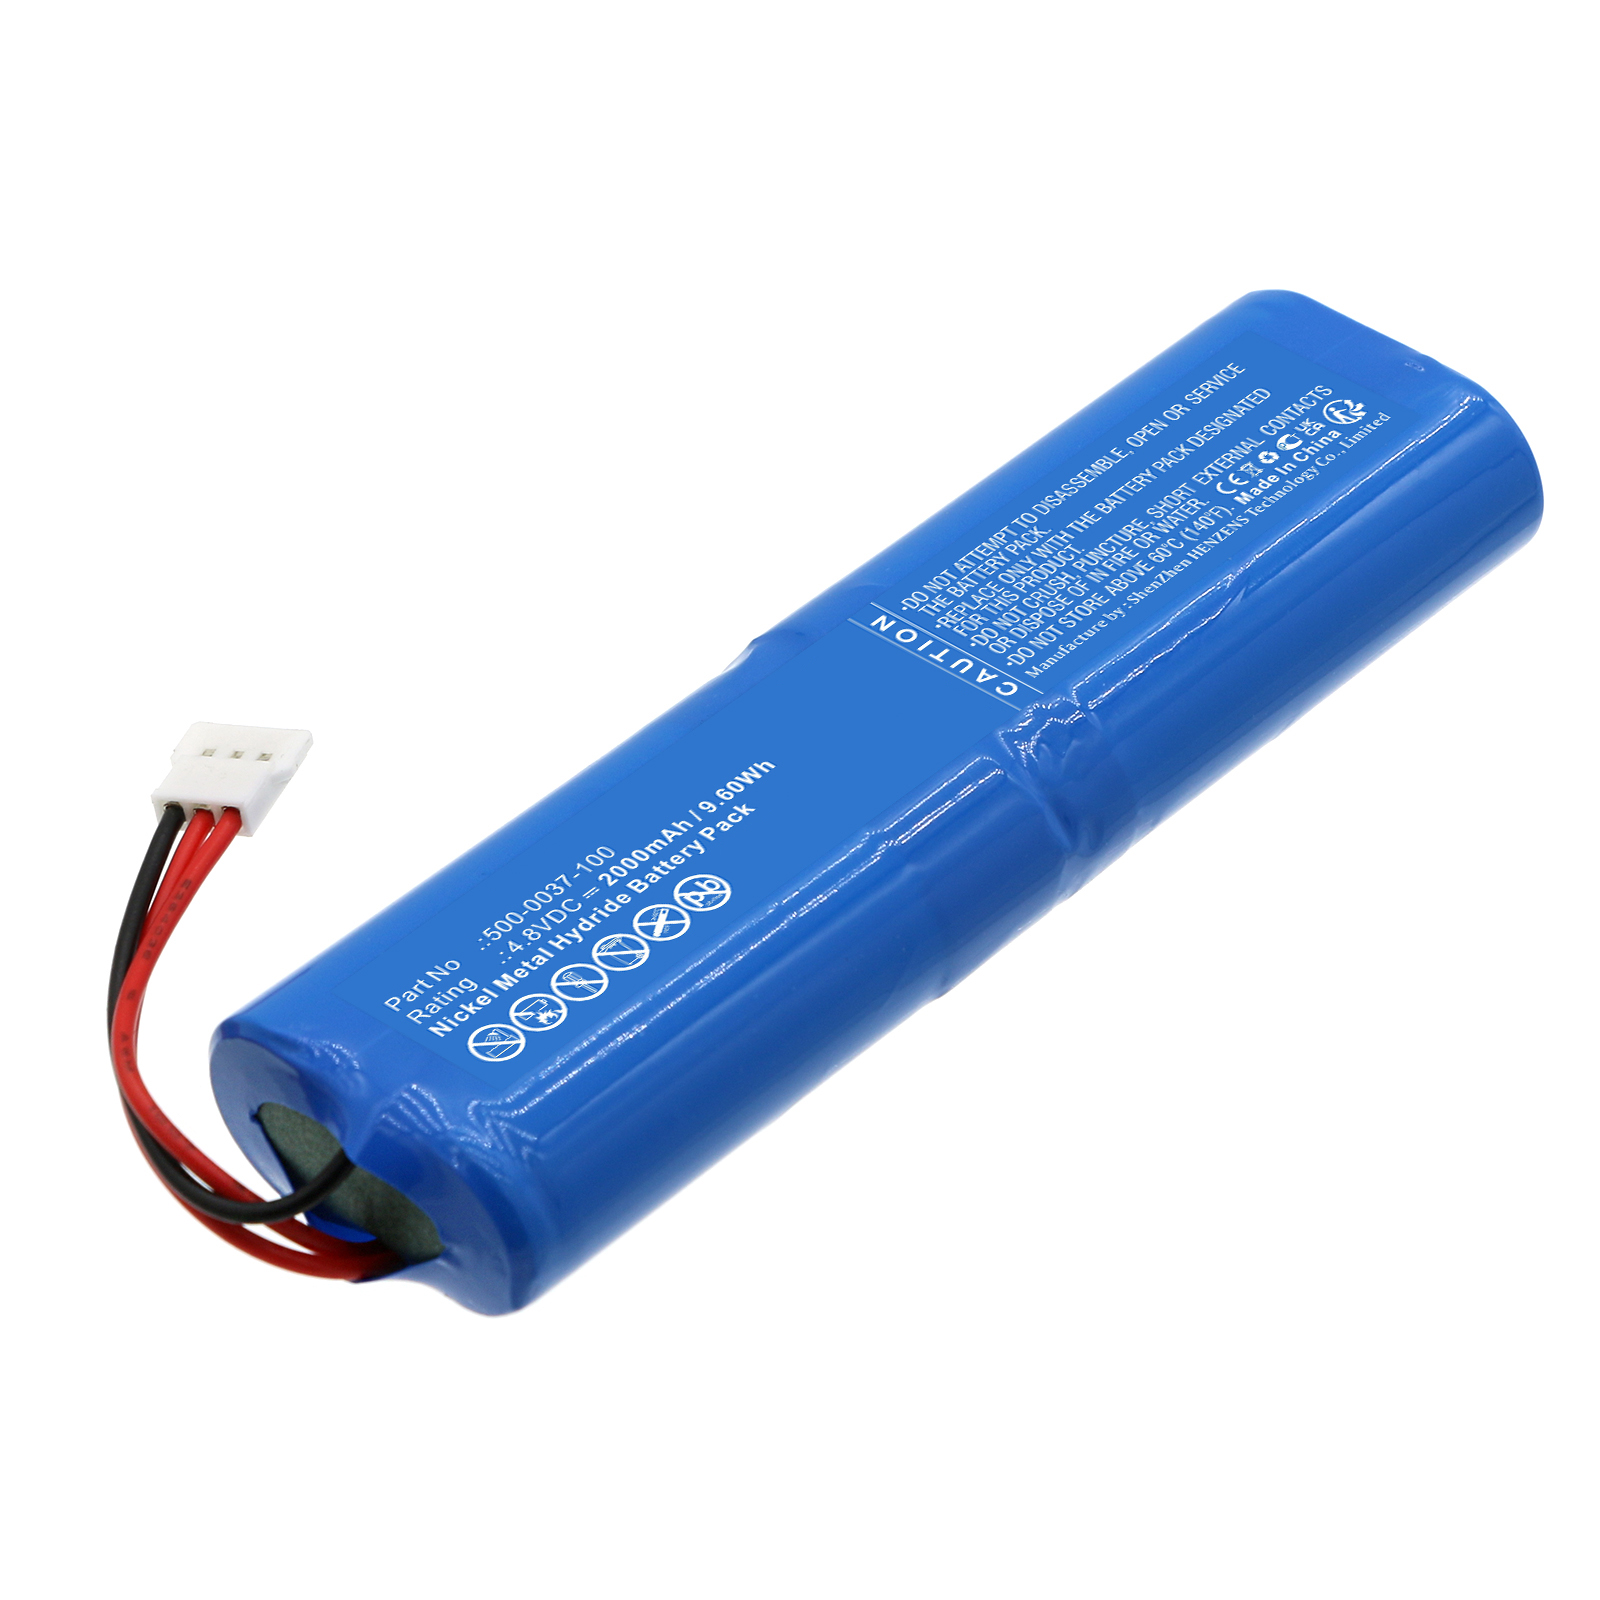 Synergy Digital Equipment Battery, Compatible with RAE Systems 0059 0039 0037 Equipment Battery (Ni-MH, 4.8V, 2000mAh)